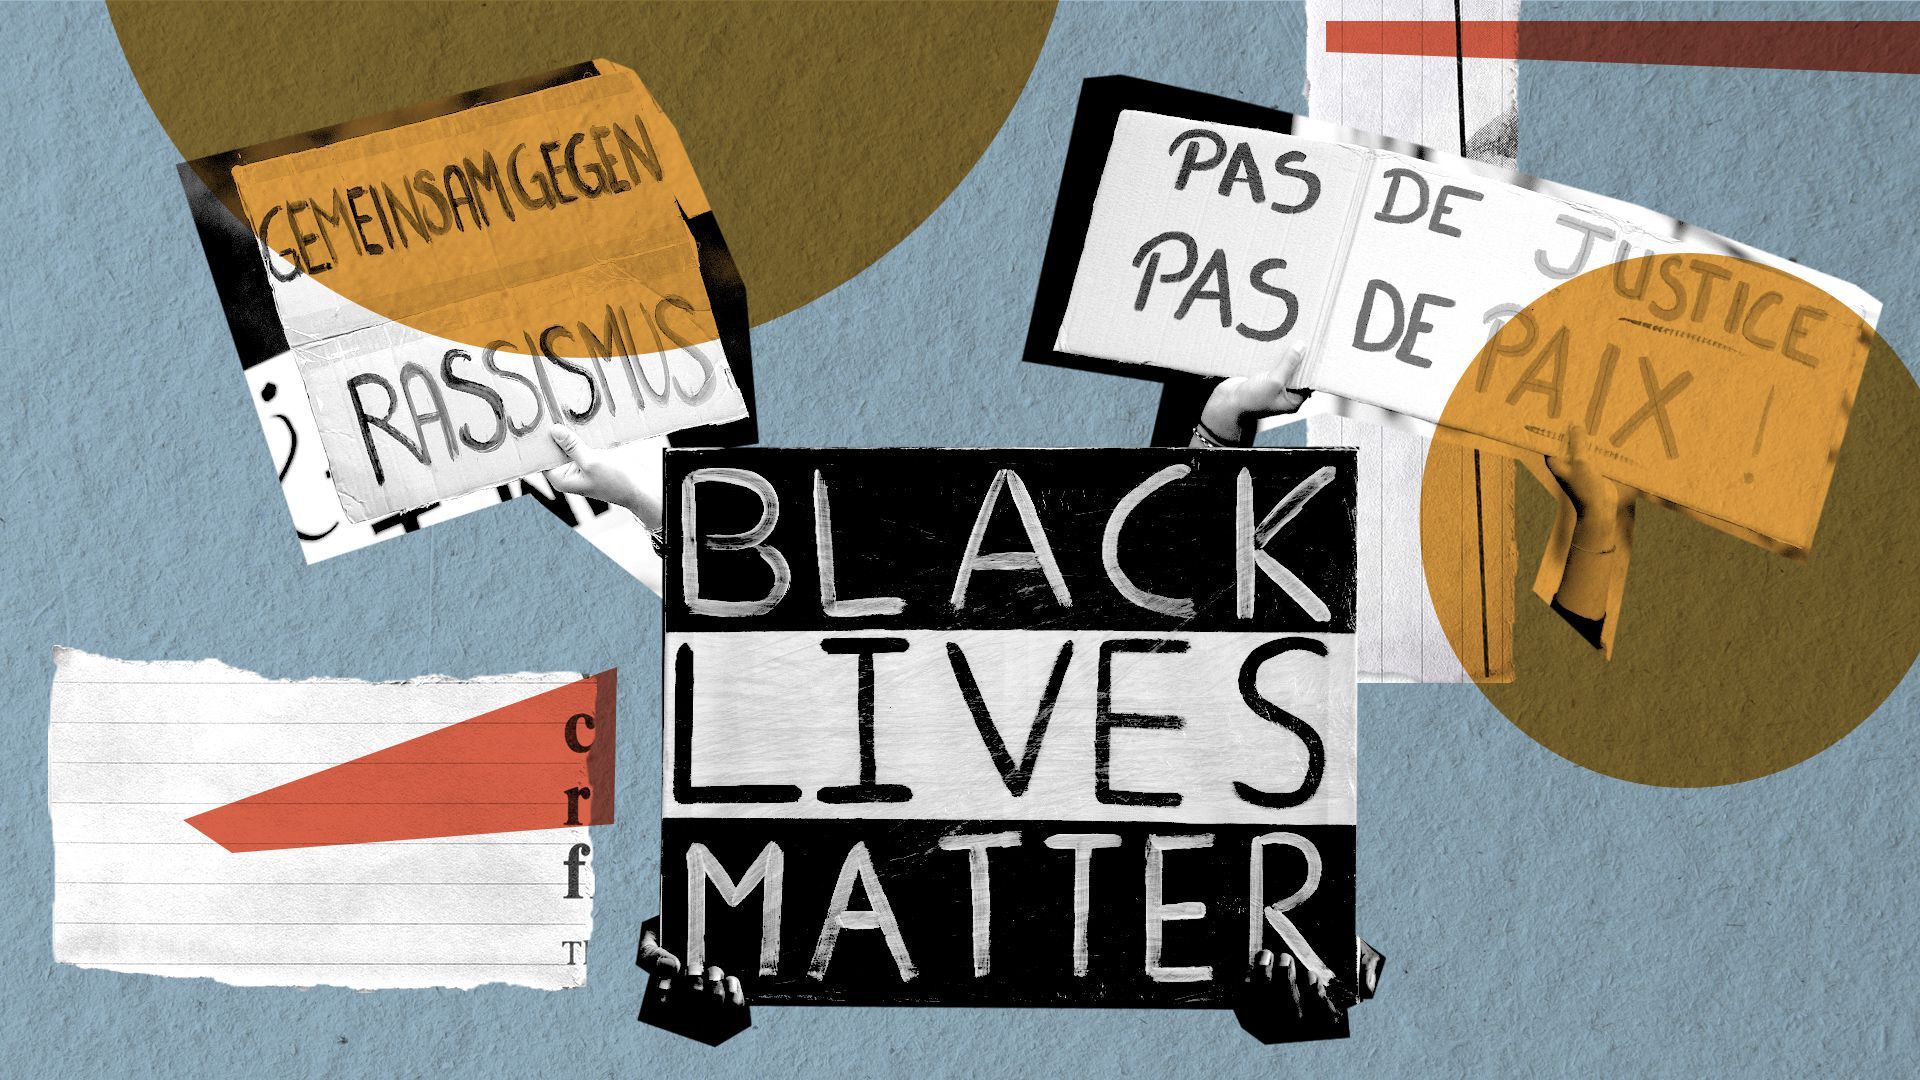 Black Lives Matter signs in different languages